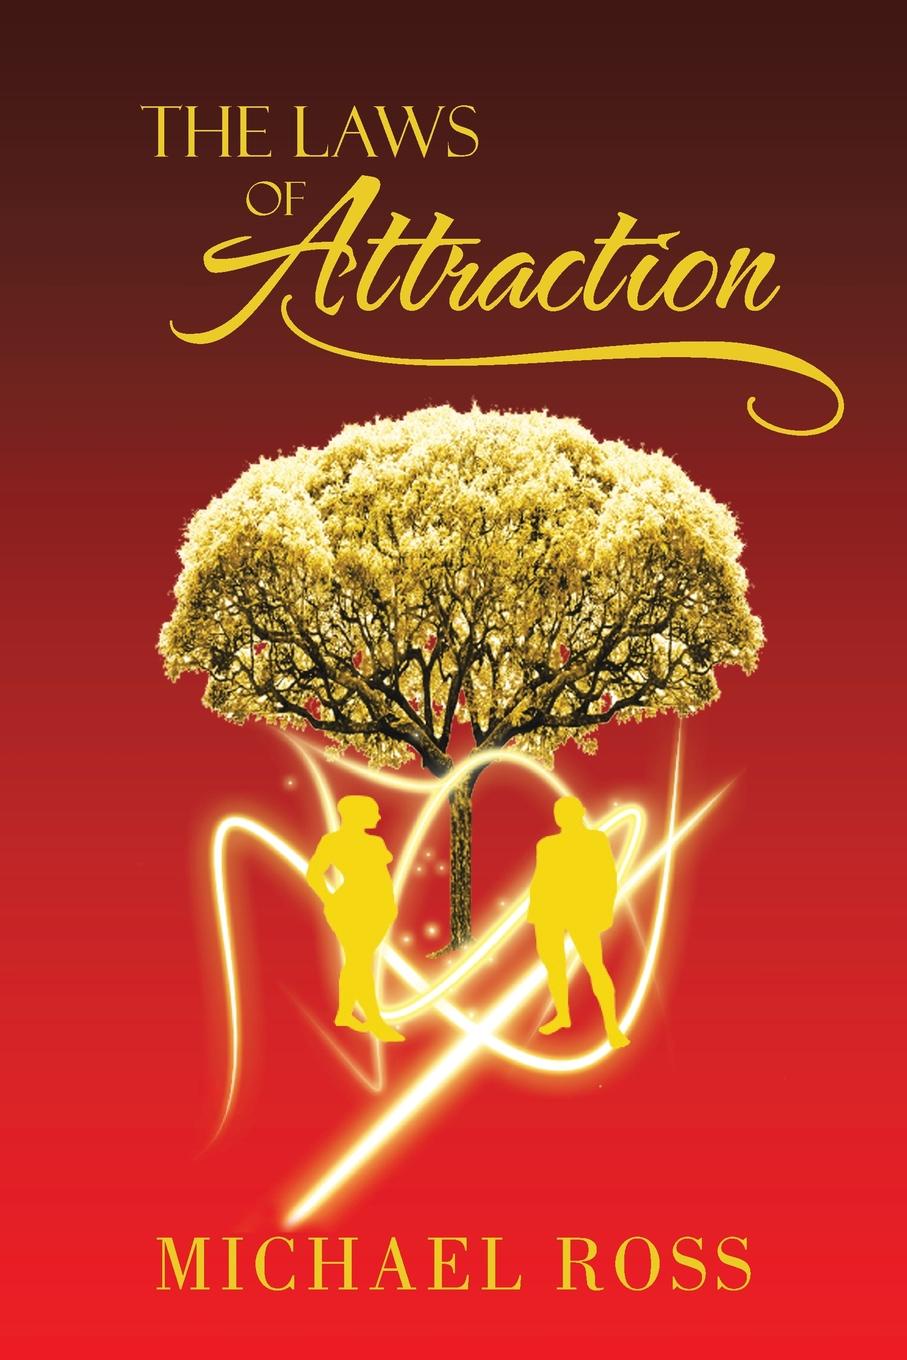 The Laws of Attraction. The Manual That Seeks to Reach the Greatest Part of You: Your Potential